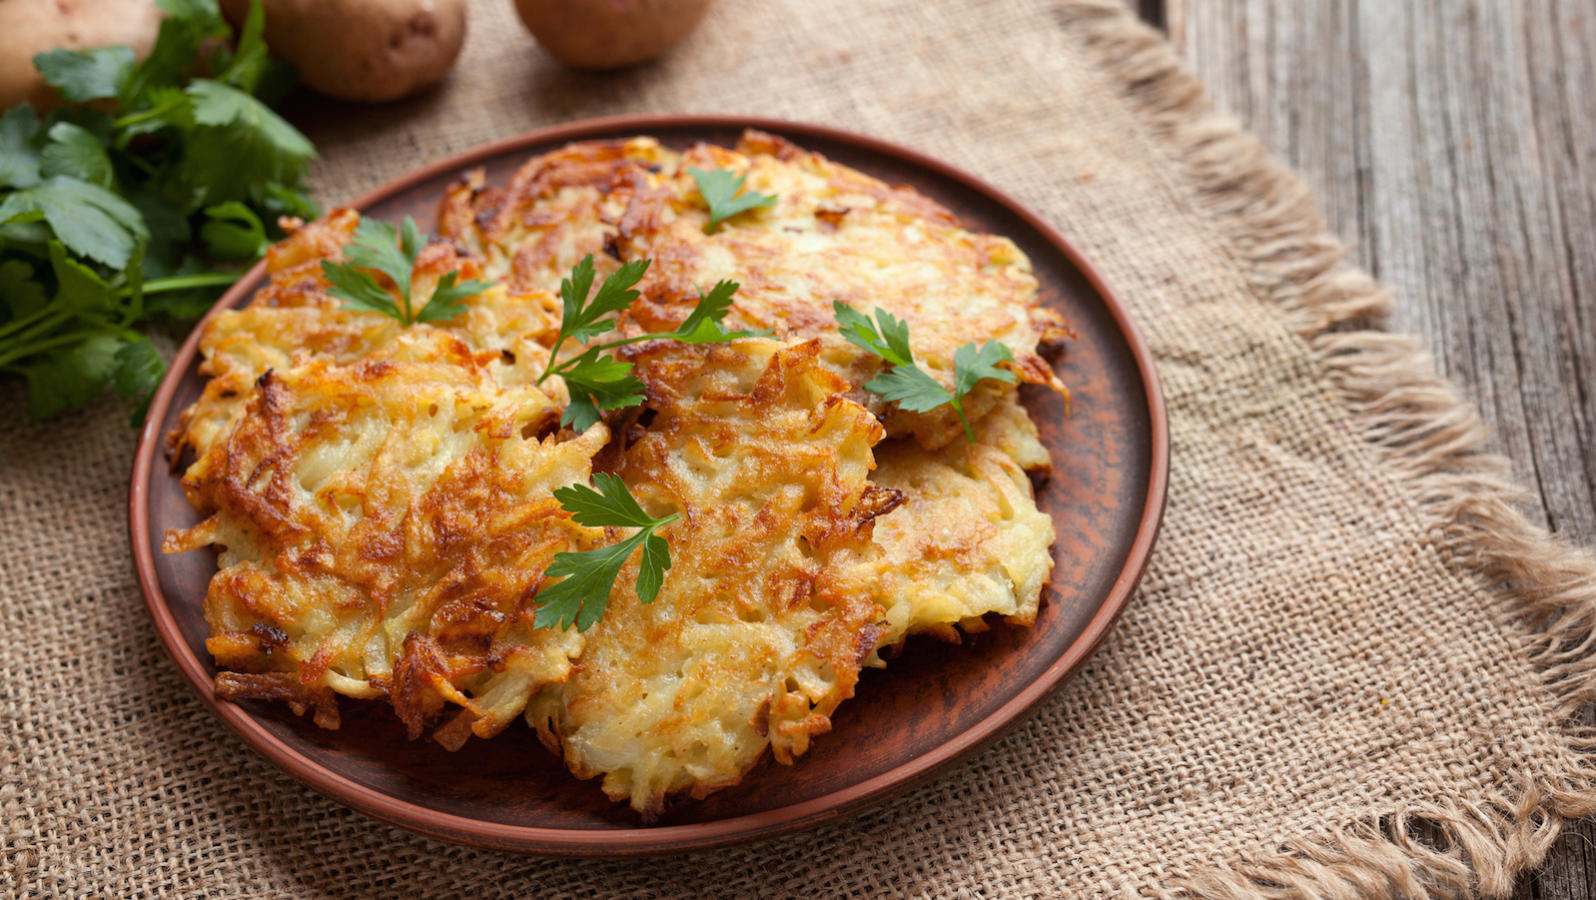 🥔 Can We Guess Your Generation Based on the Different Ways You’ve Eaten Potatoes? Potato pancakes or latke